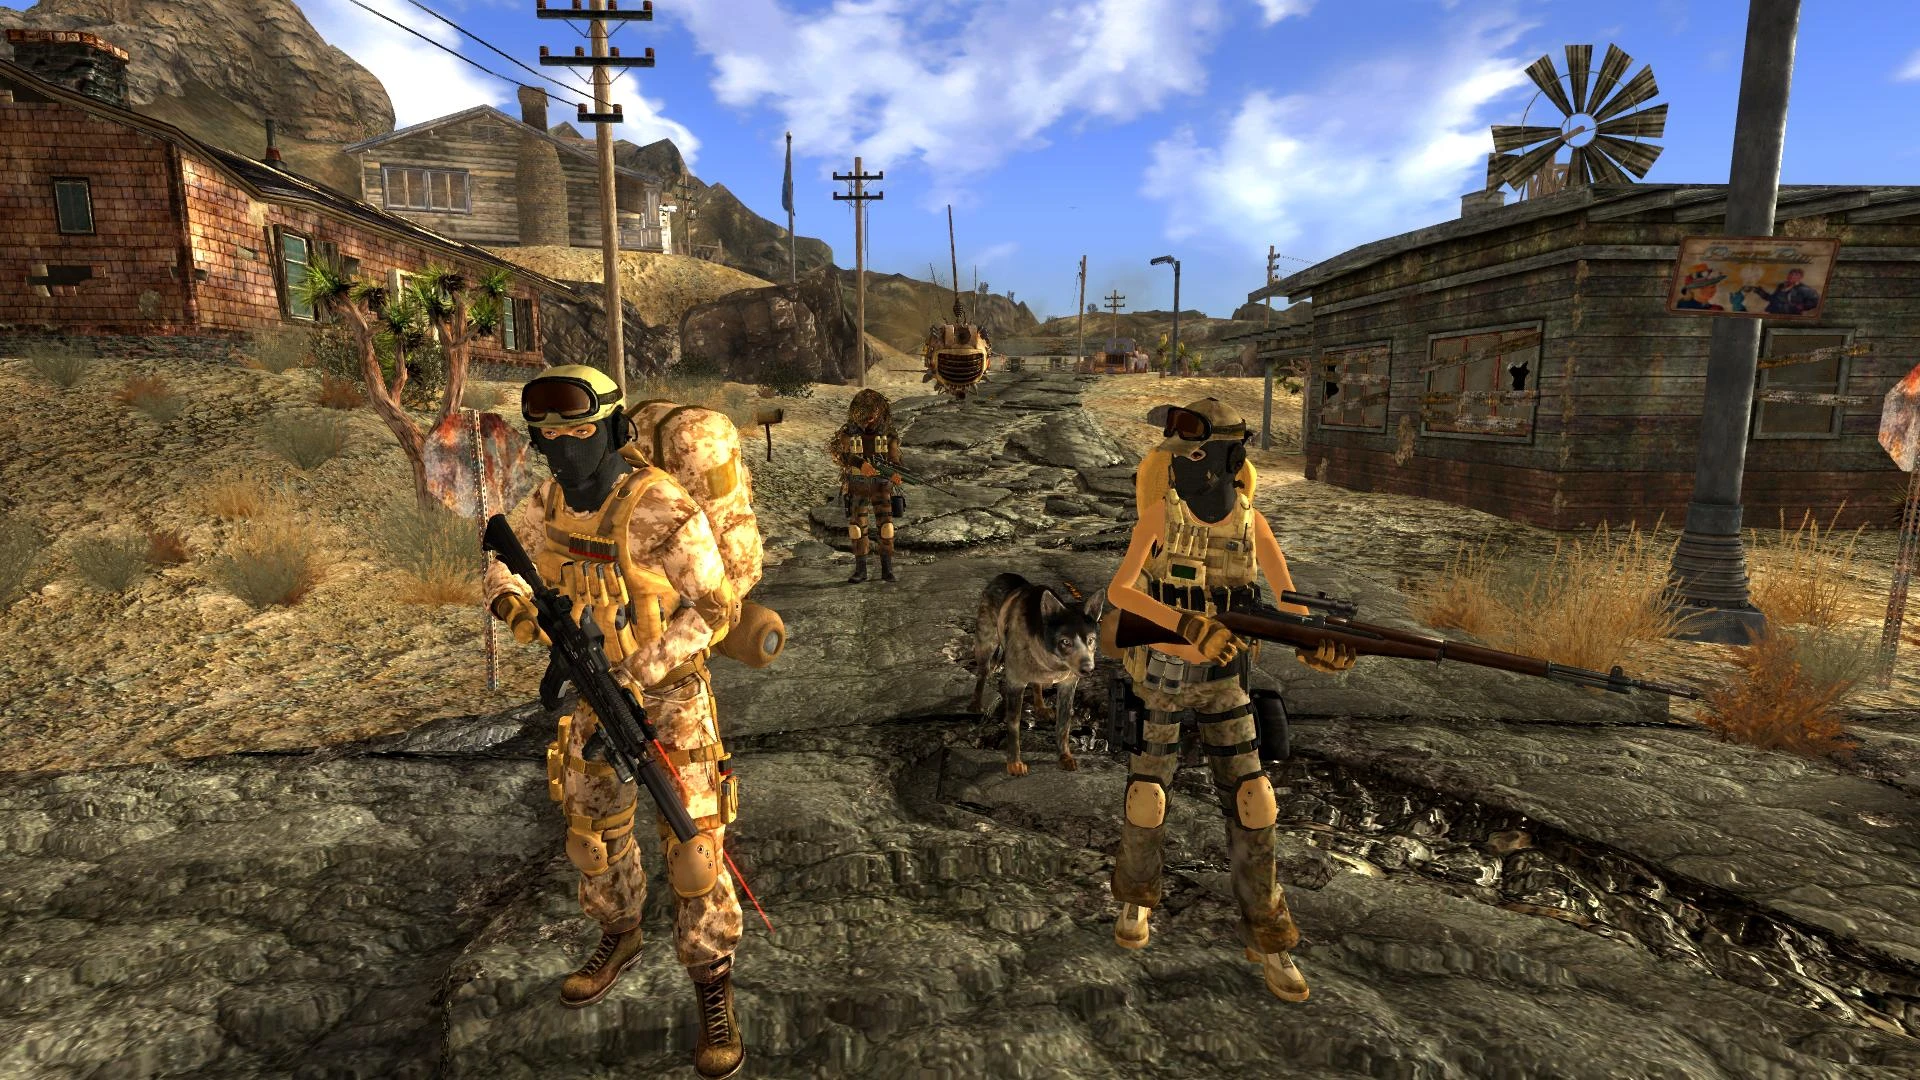 Fire Team Take 2 at Fallout New Vegas - mods and community